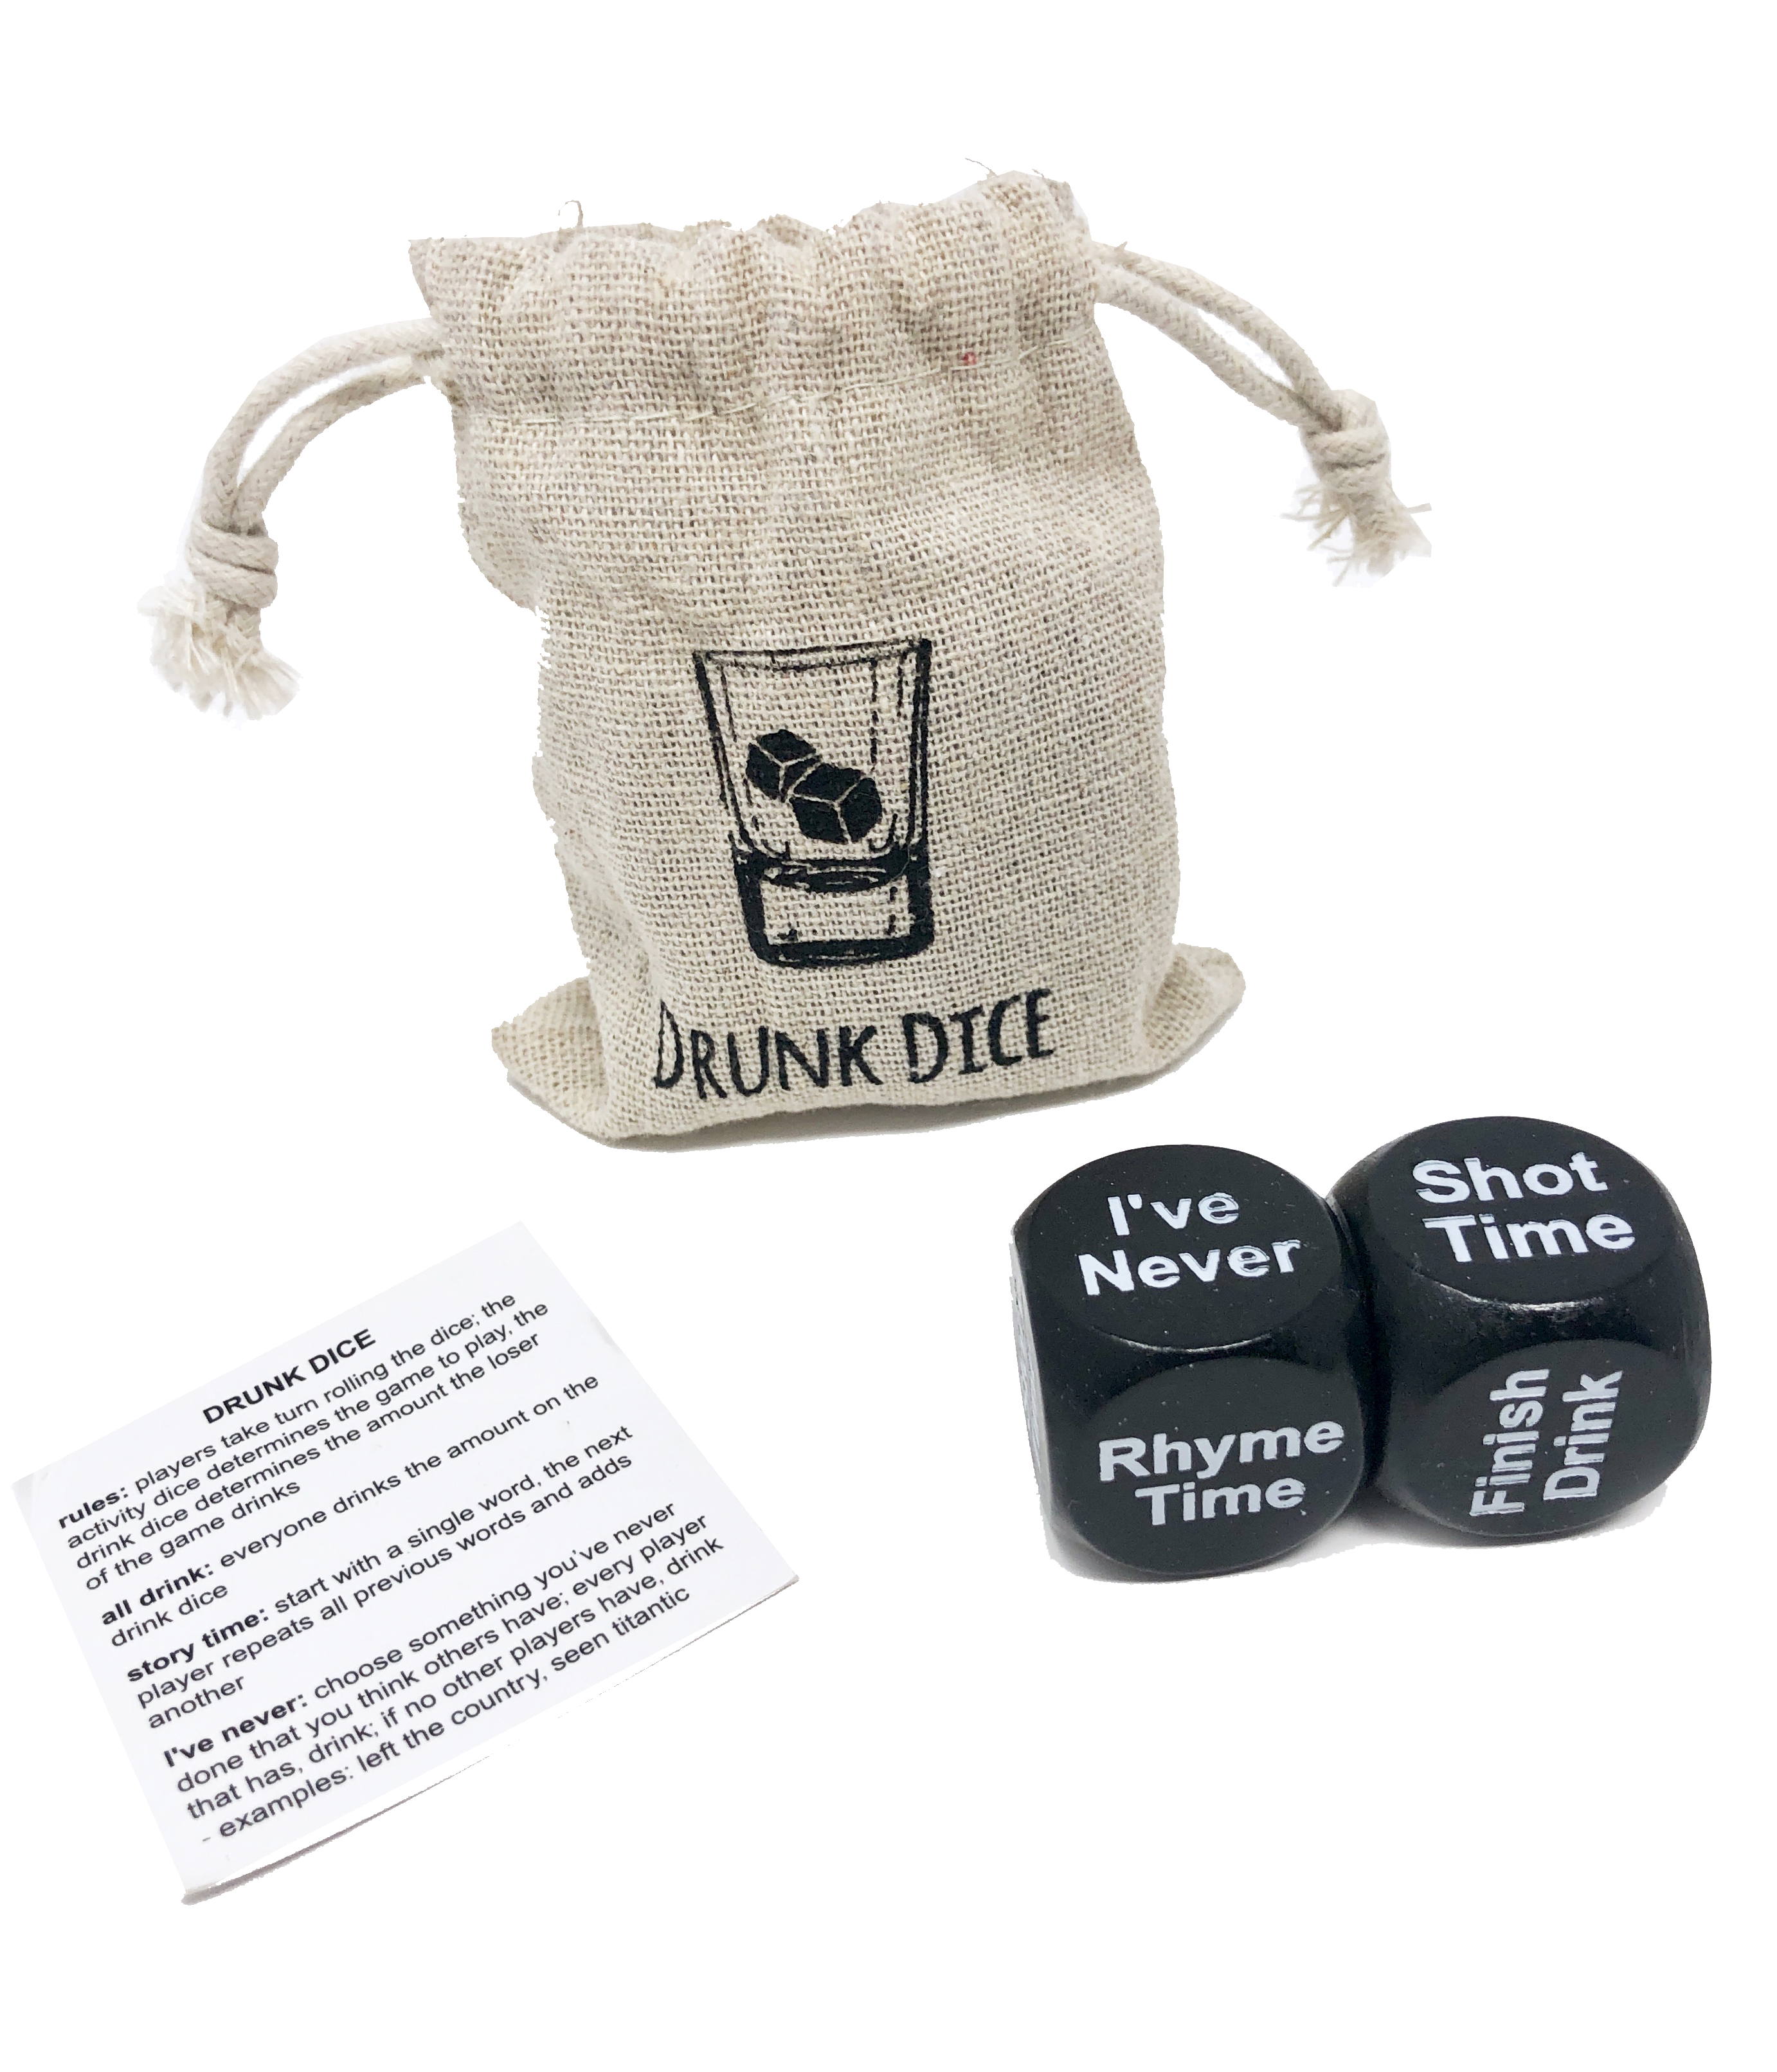 https://cdn.shopify.com/s/files/1/0343/7130/5516/products/DrunkDice2.png?v=1594747336